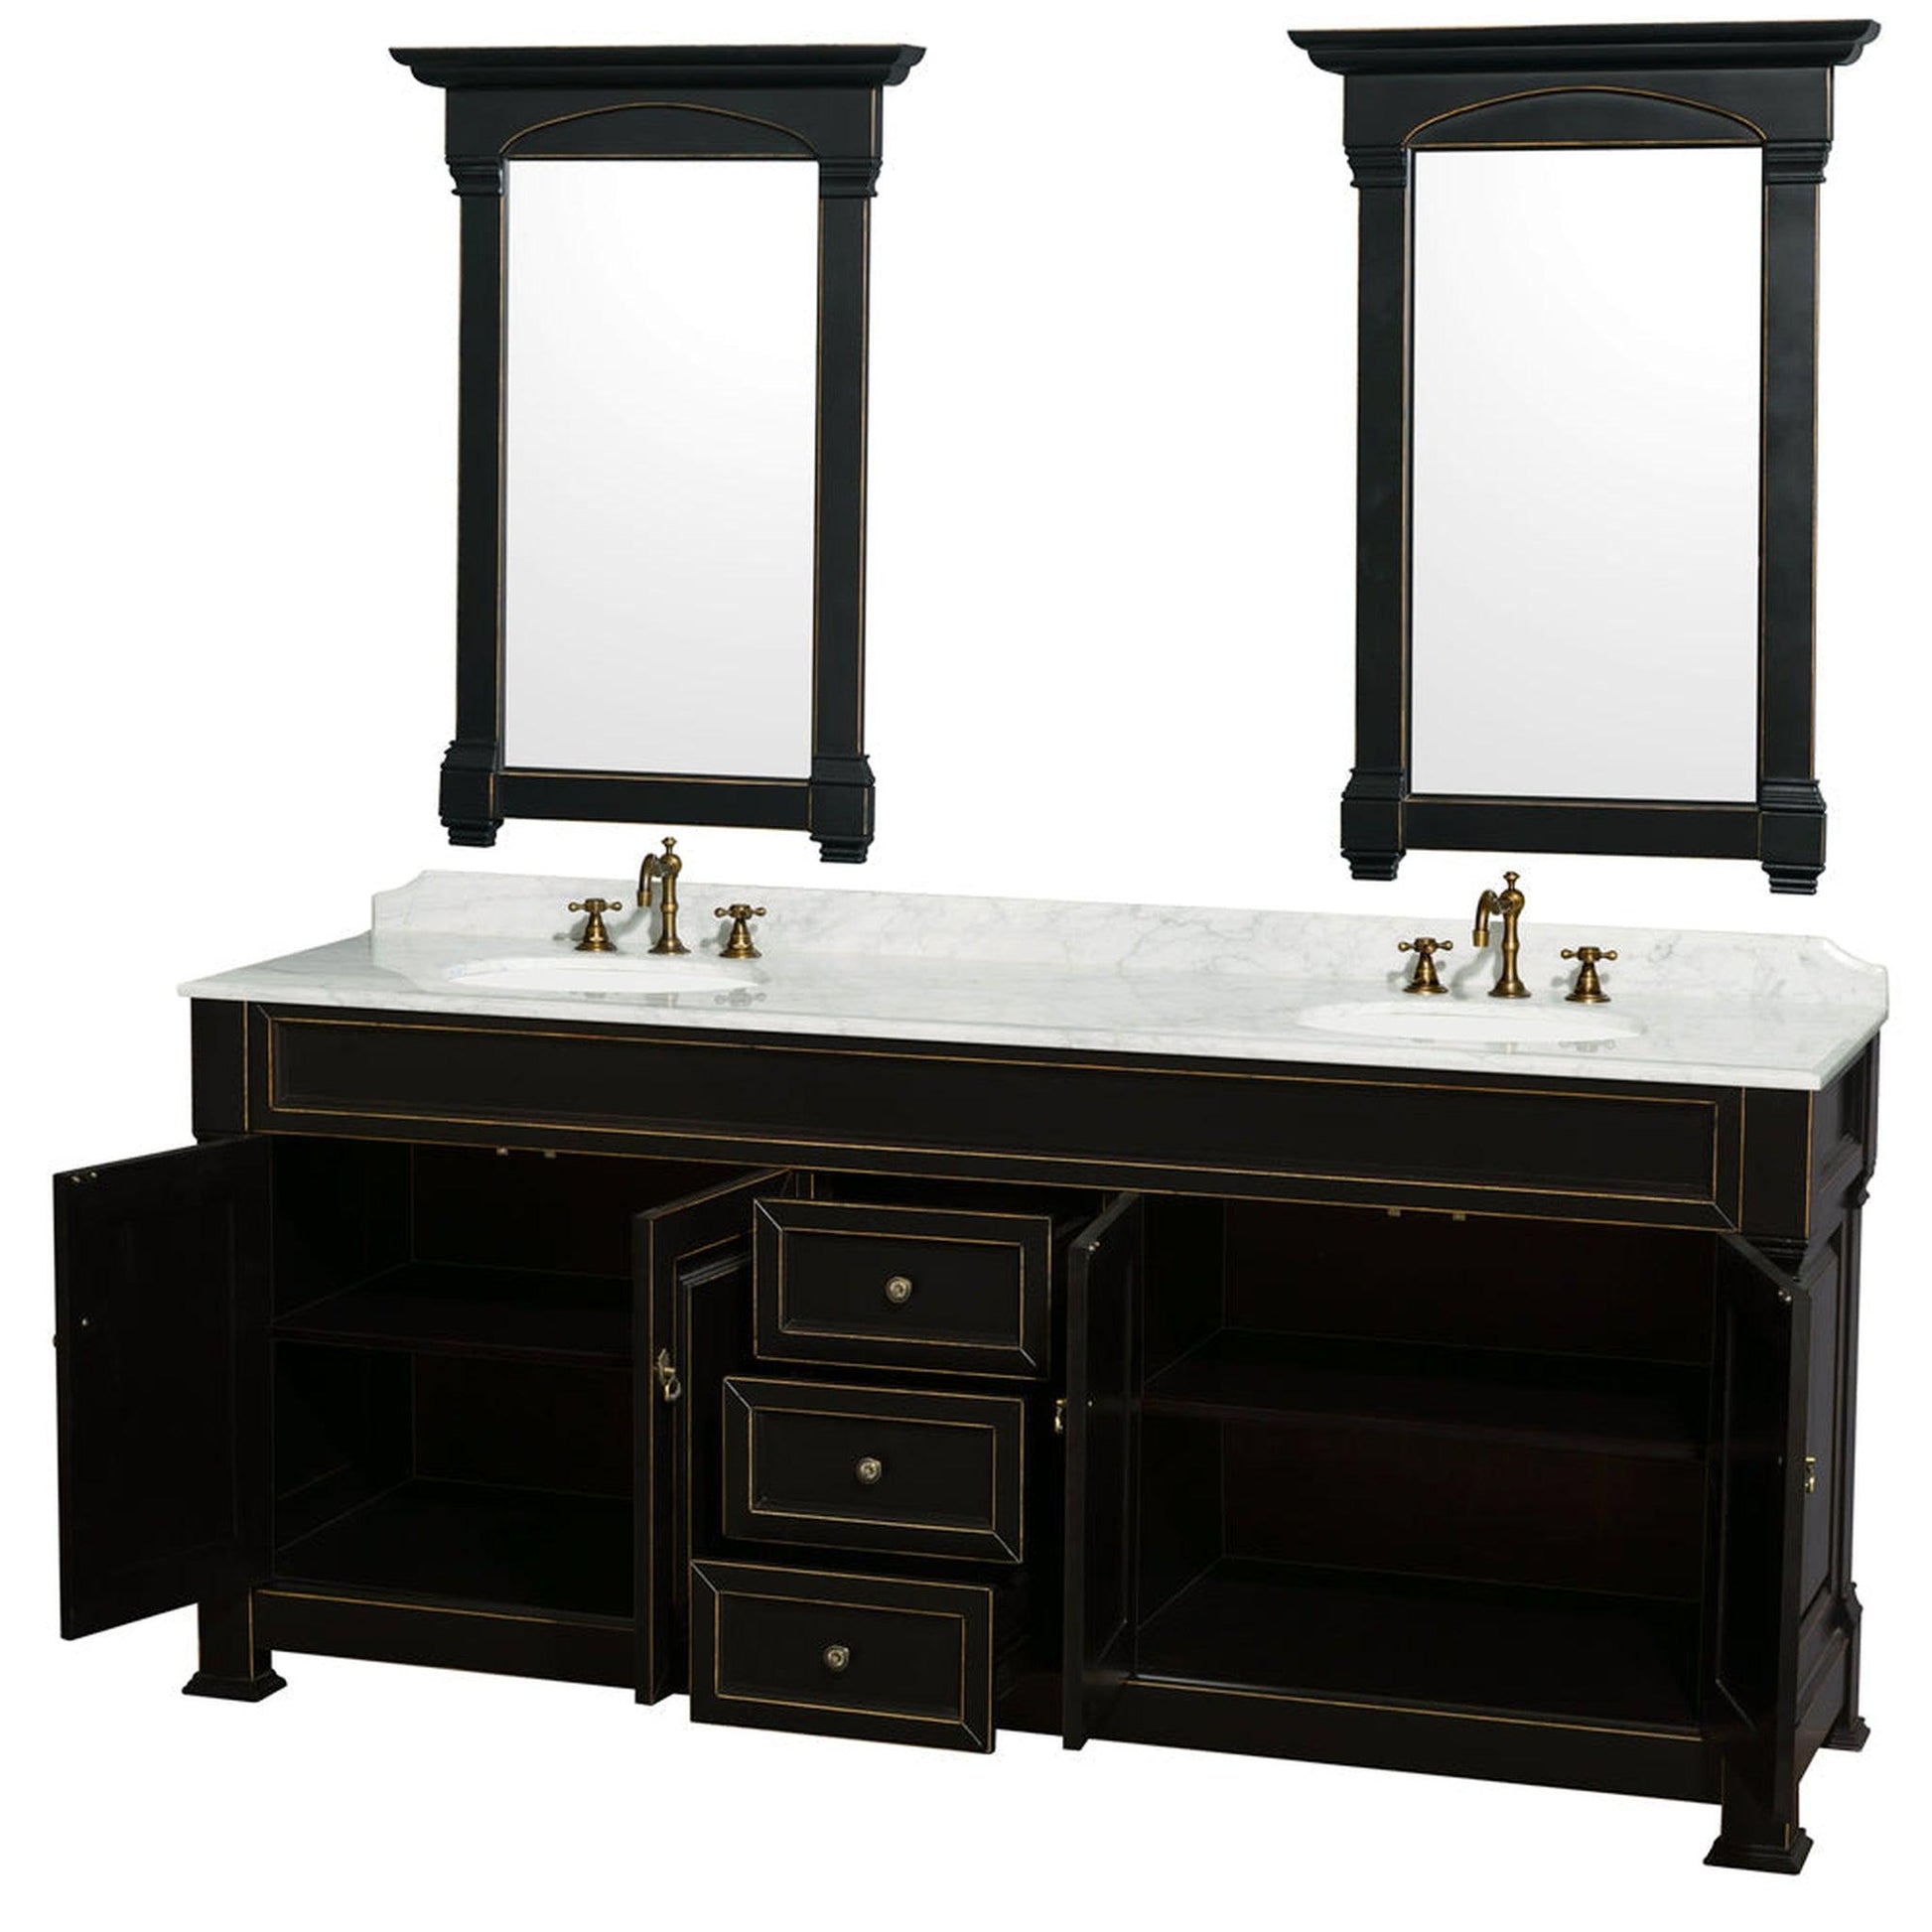 Wyndham Collection Andover 80" Double Bathroom Vanity in Black With White Carrara Marble Countertop, Undermount Oval Sink & 28" Mirror